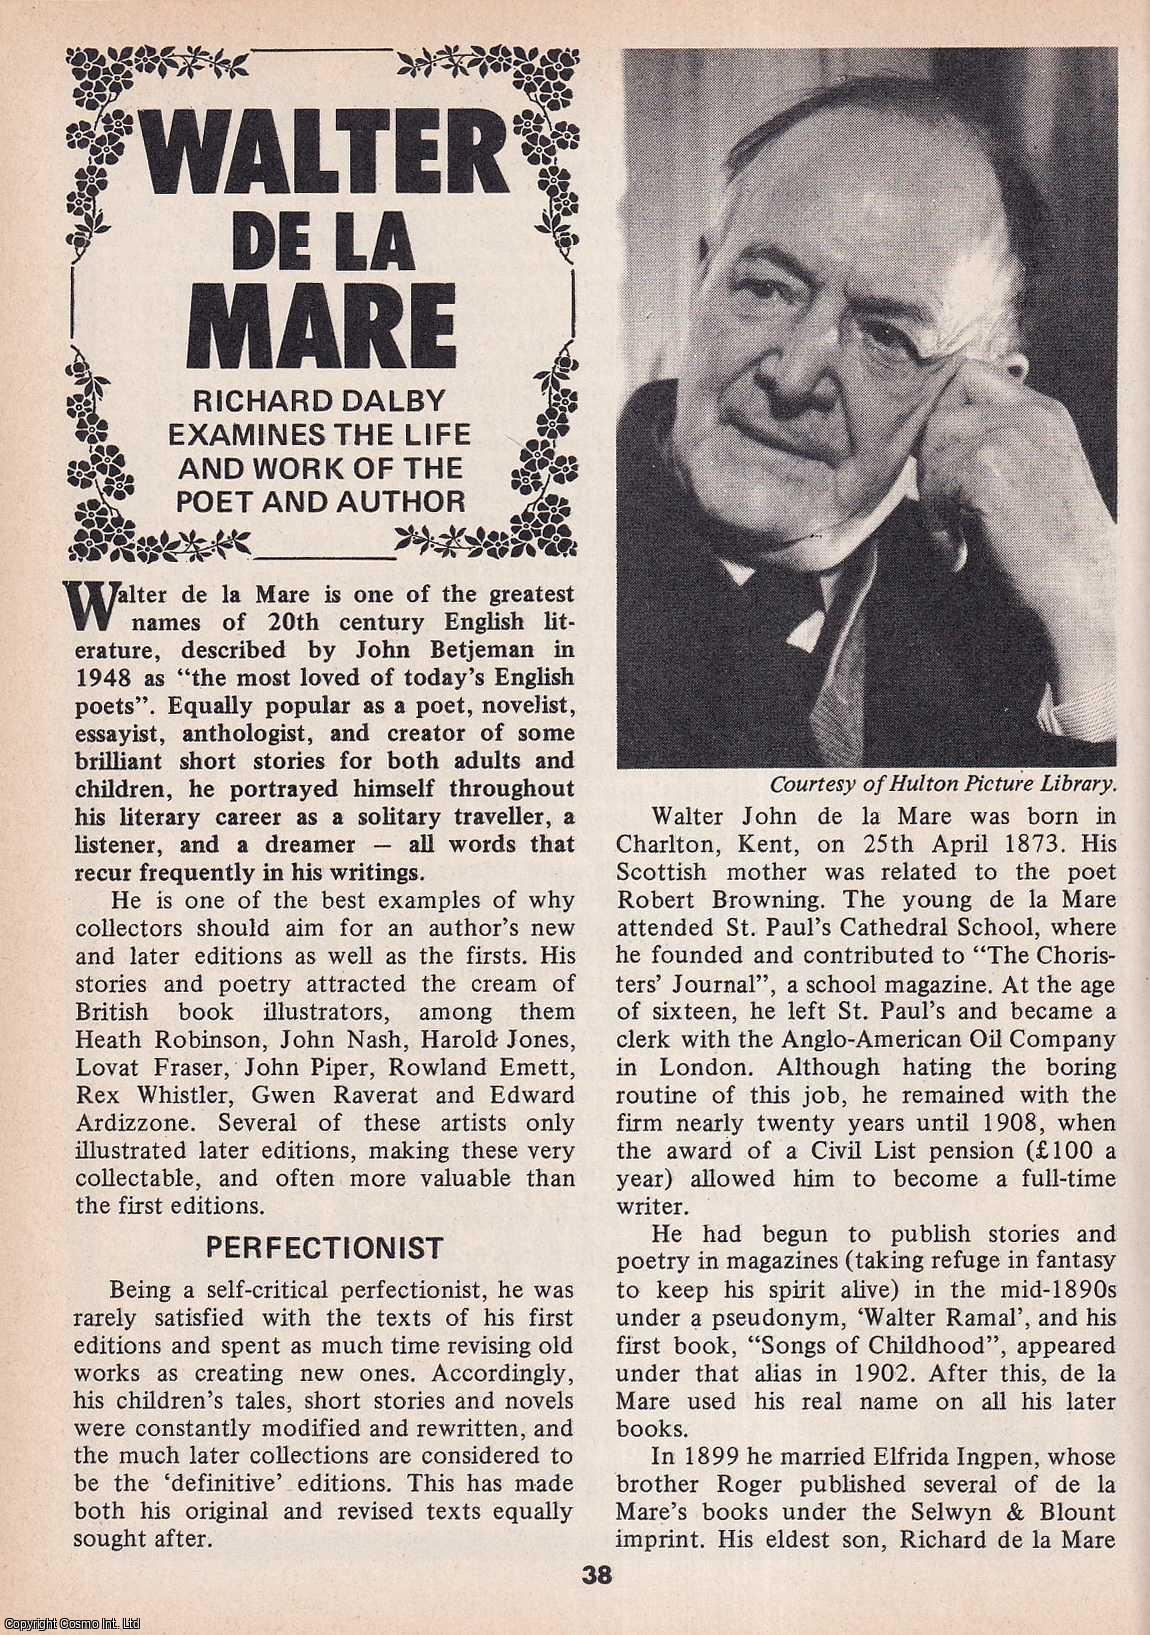 Richard Dalby - Walter De La Mare. Examining The Life and Work of The Poet and Author. This is an original article separated from an issue of The Book & Magazine Collector publication.